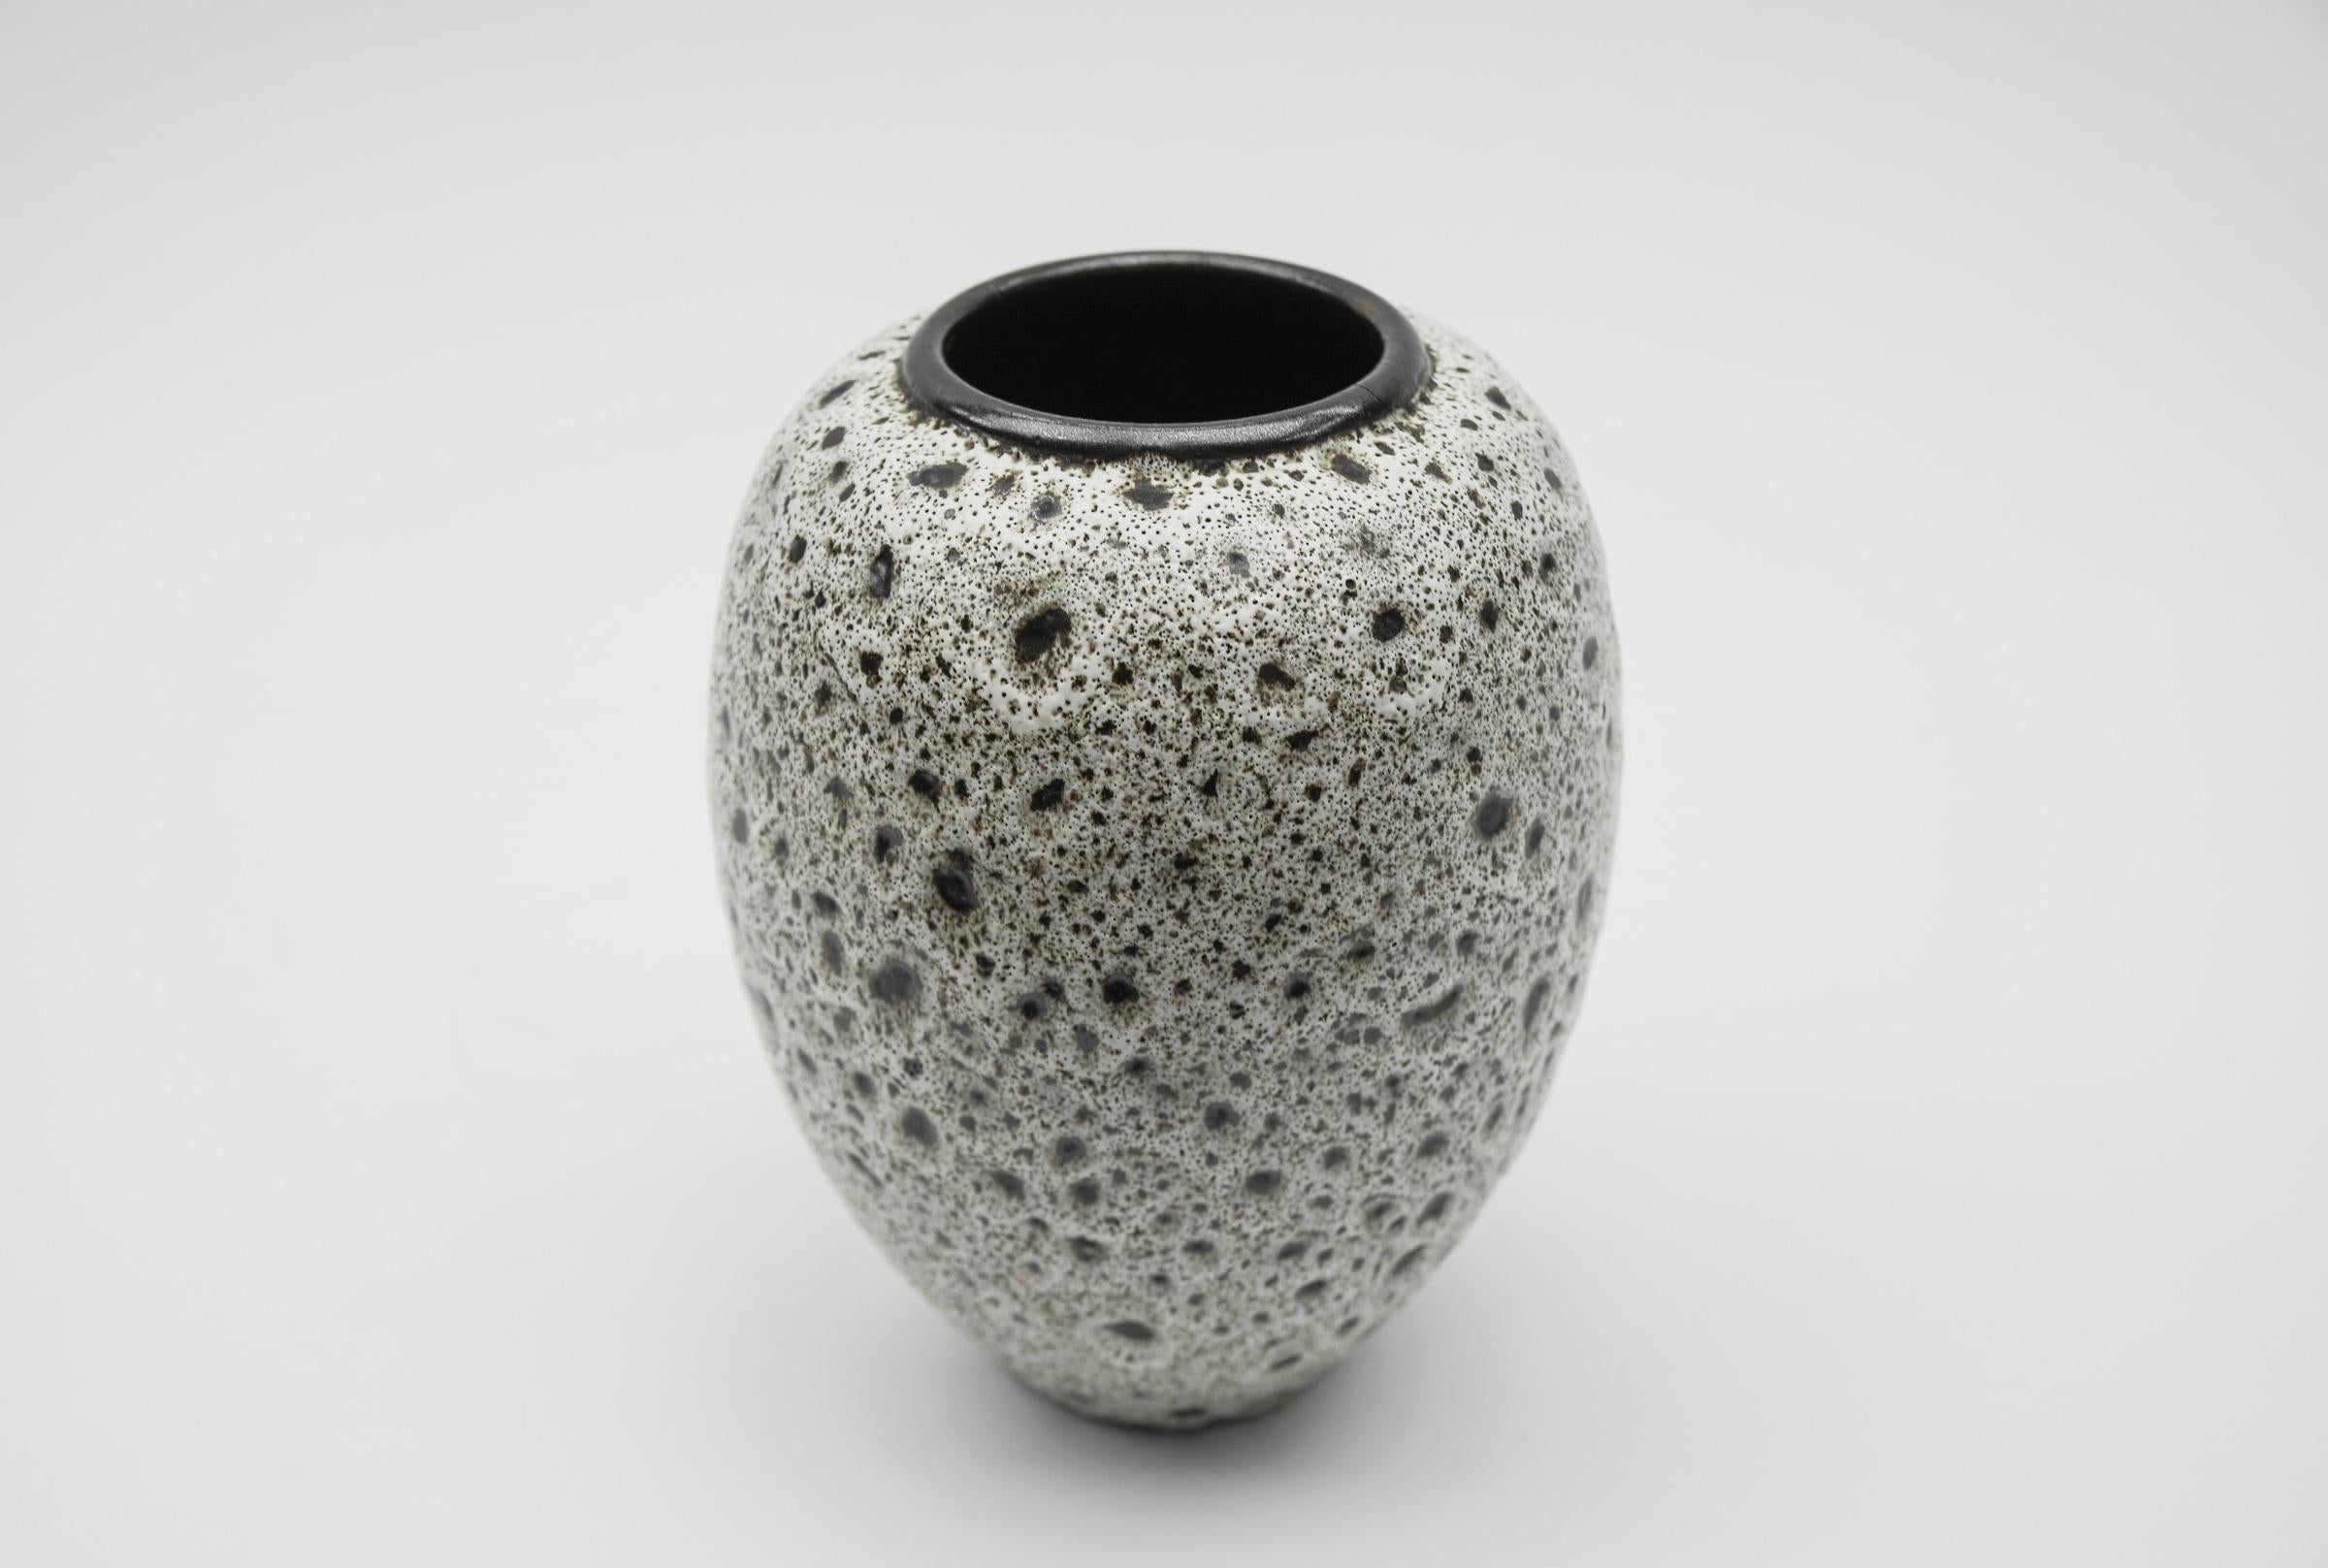 Nice White & Black Studio Ceramic Vase by Wilhelm & Elly Kuch, 1960s, Germany

We have a whole collection of the series for sale here on the platform. 

Very good condition.

------------------------------

Wilhelm Kuch, born 1925, 1947